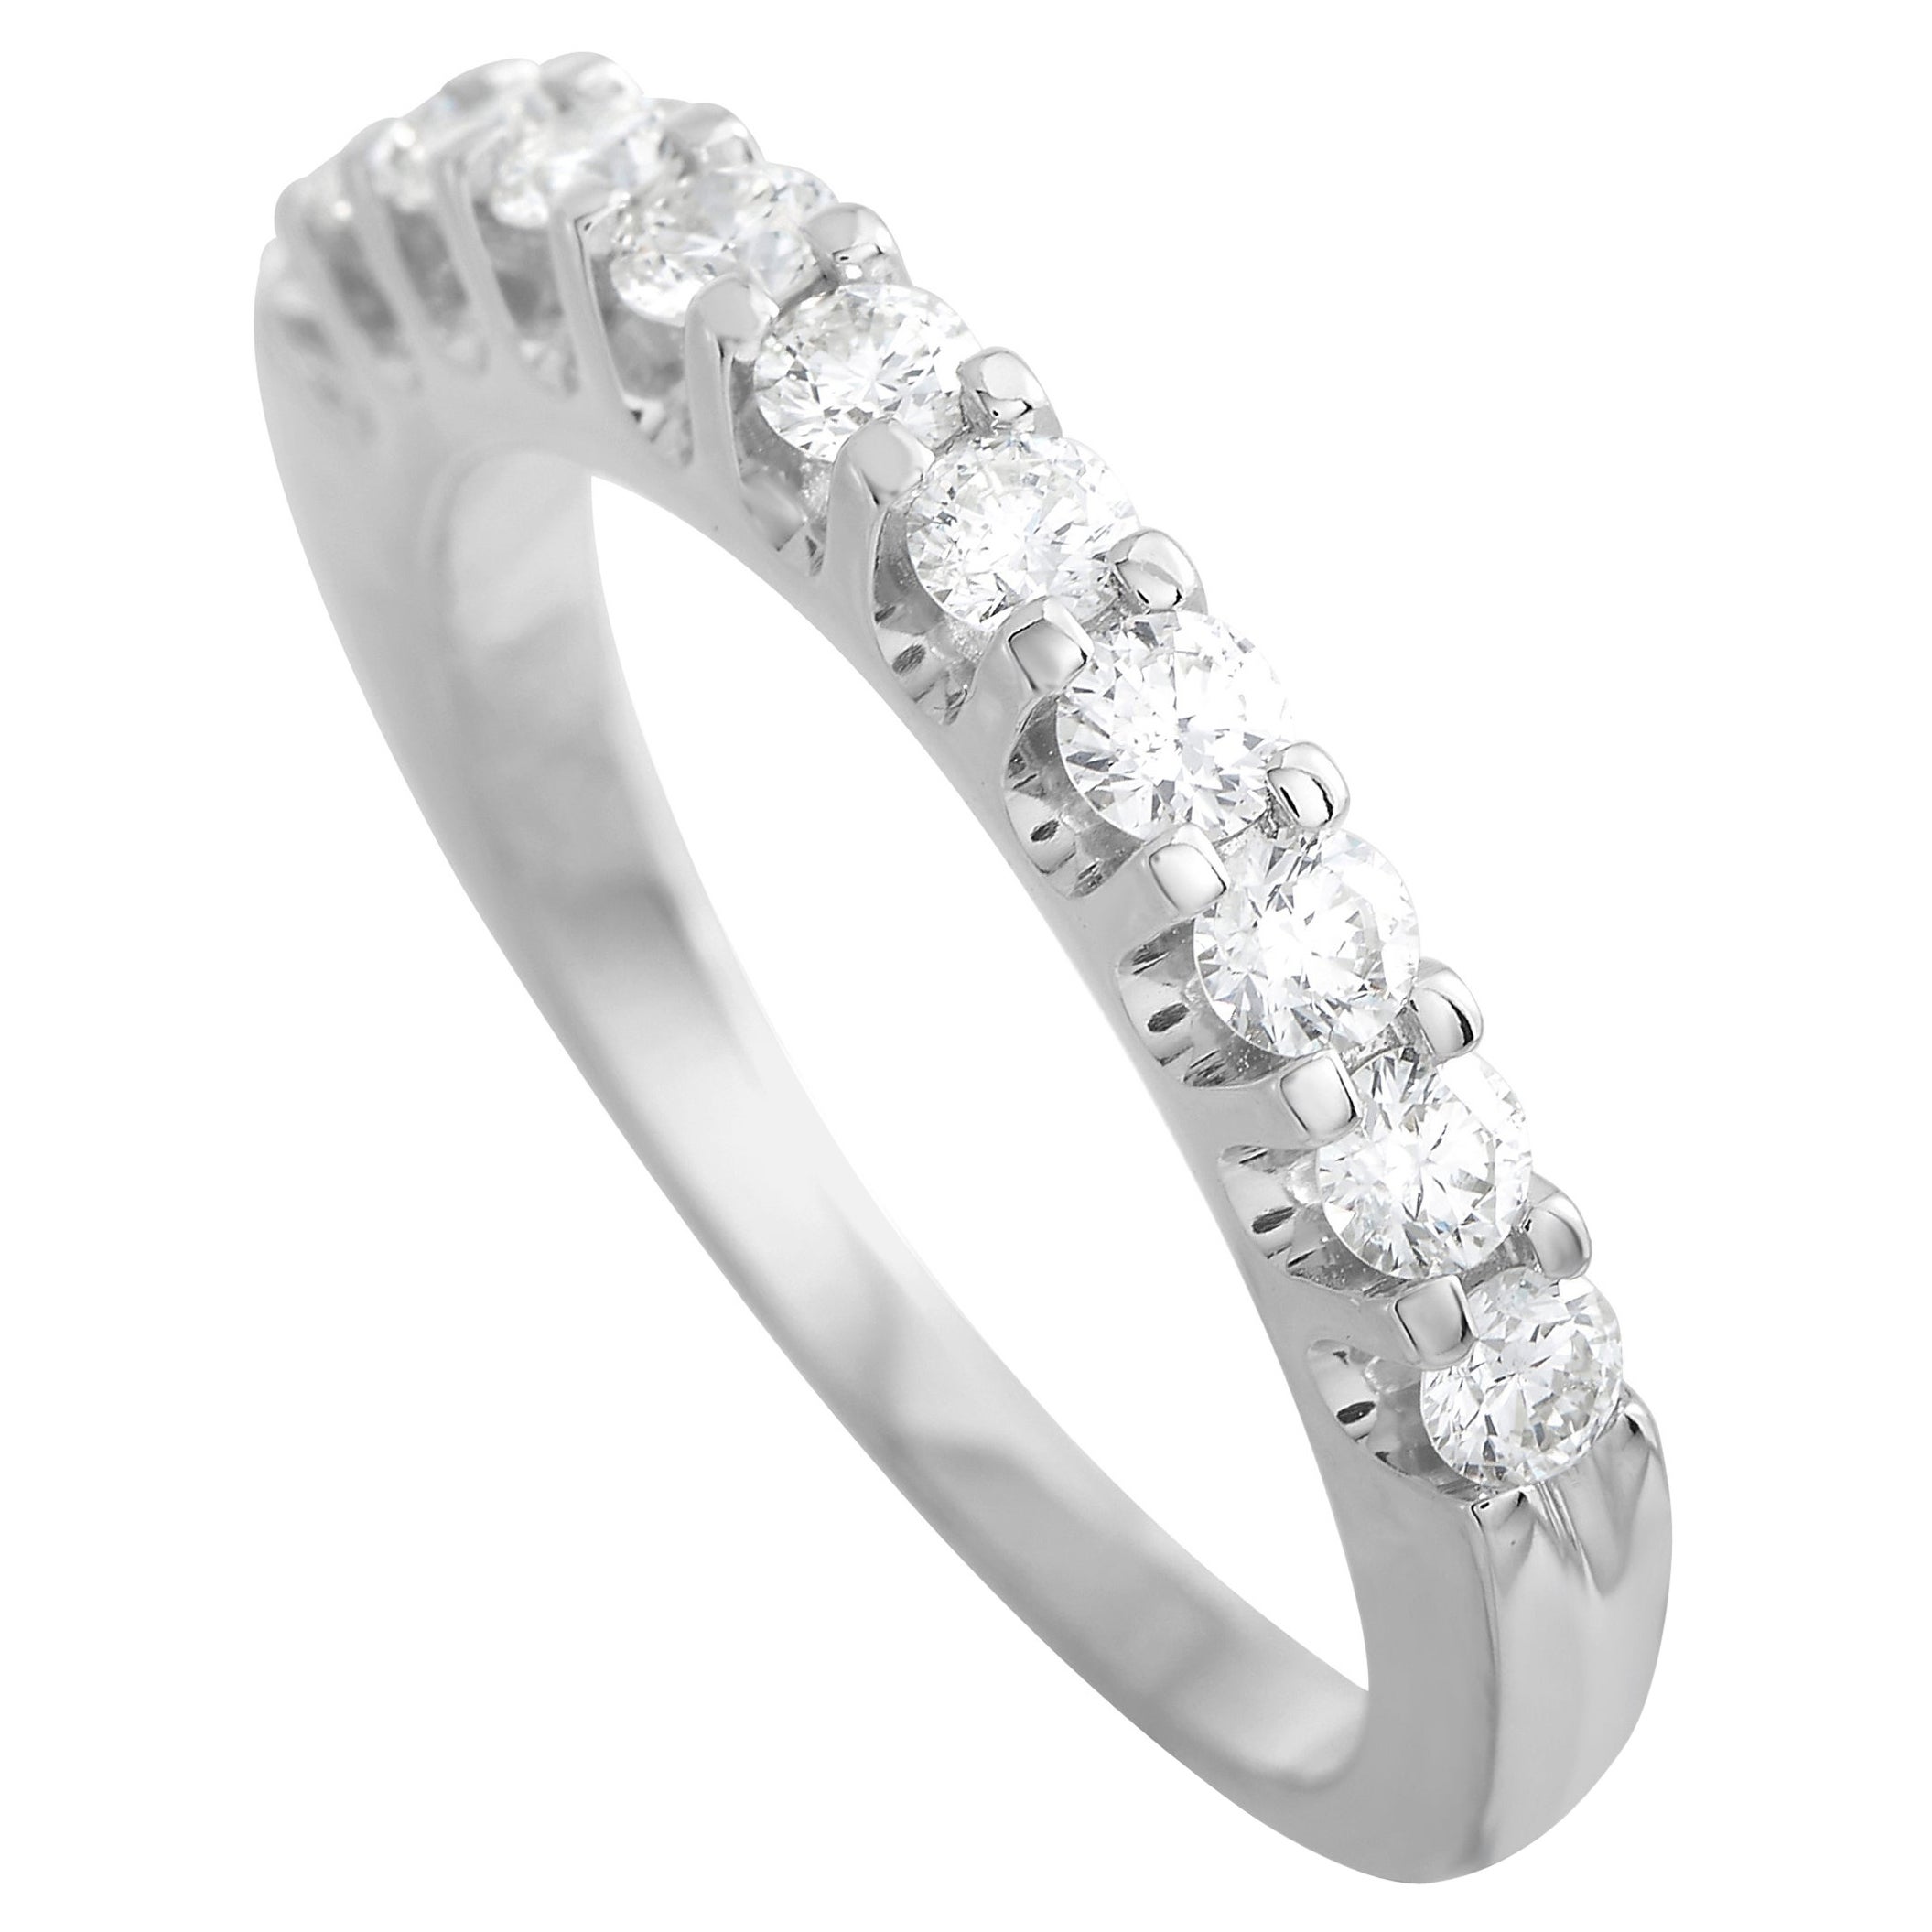 LB Exclusive 14K White Gold 0.68 Ct Diamond Eternity Band Ring